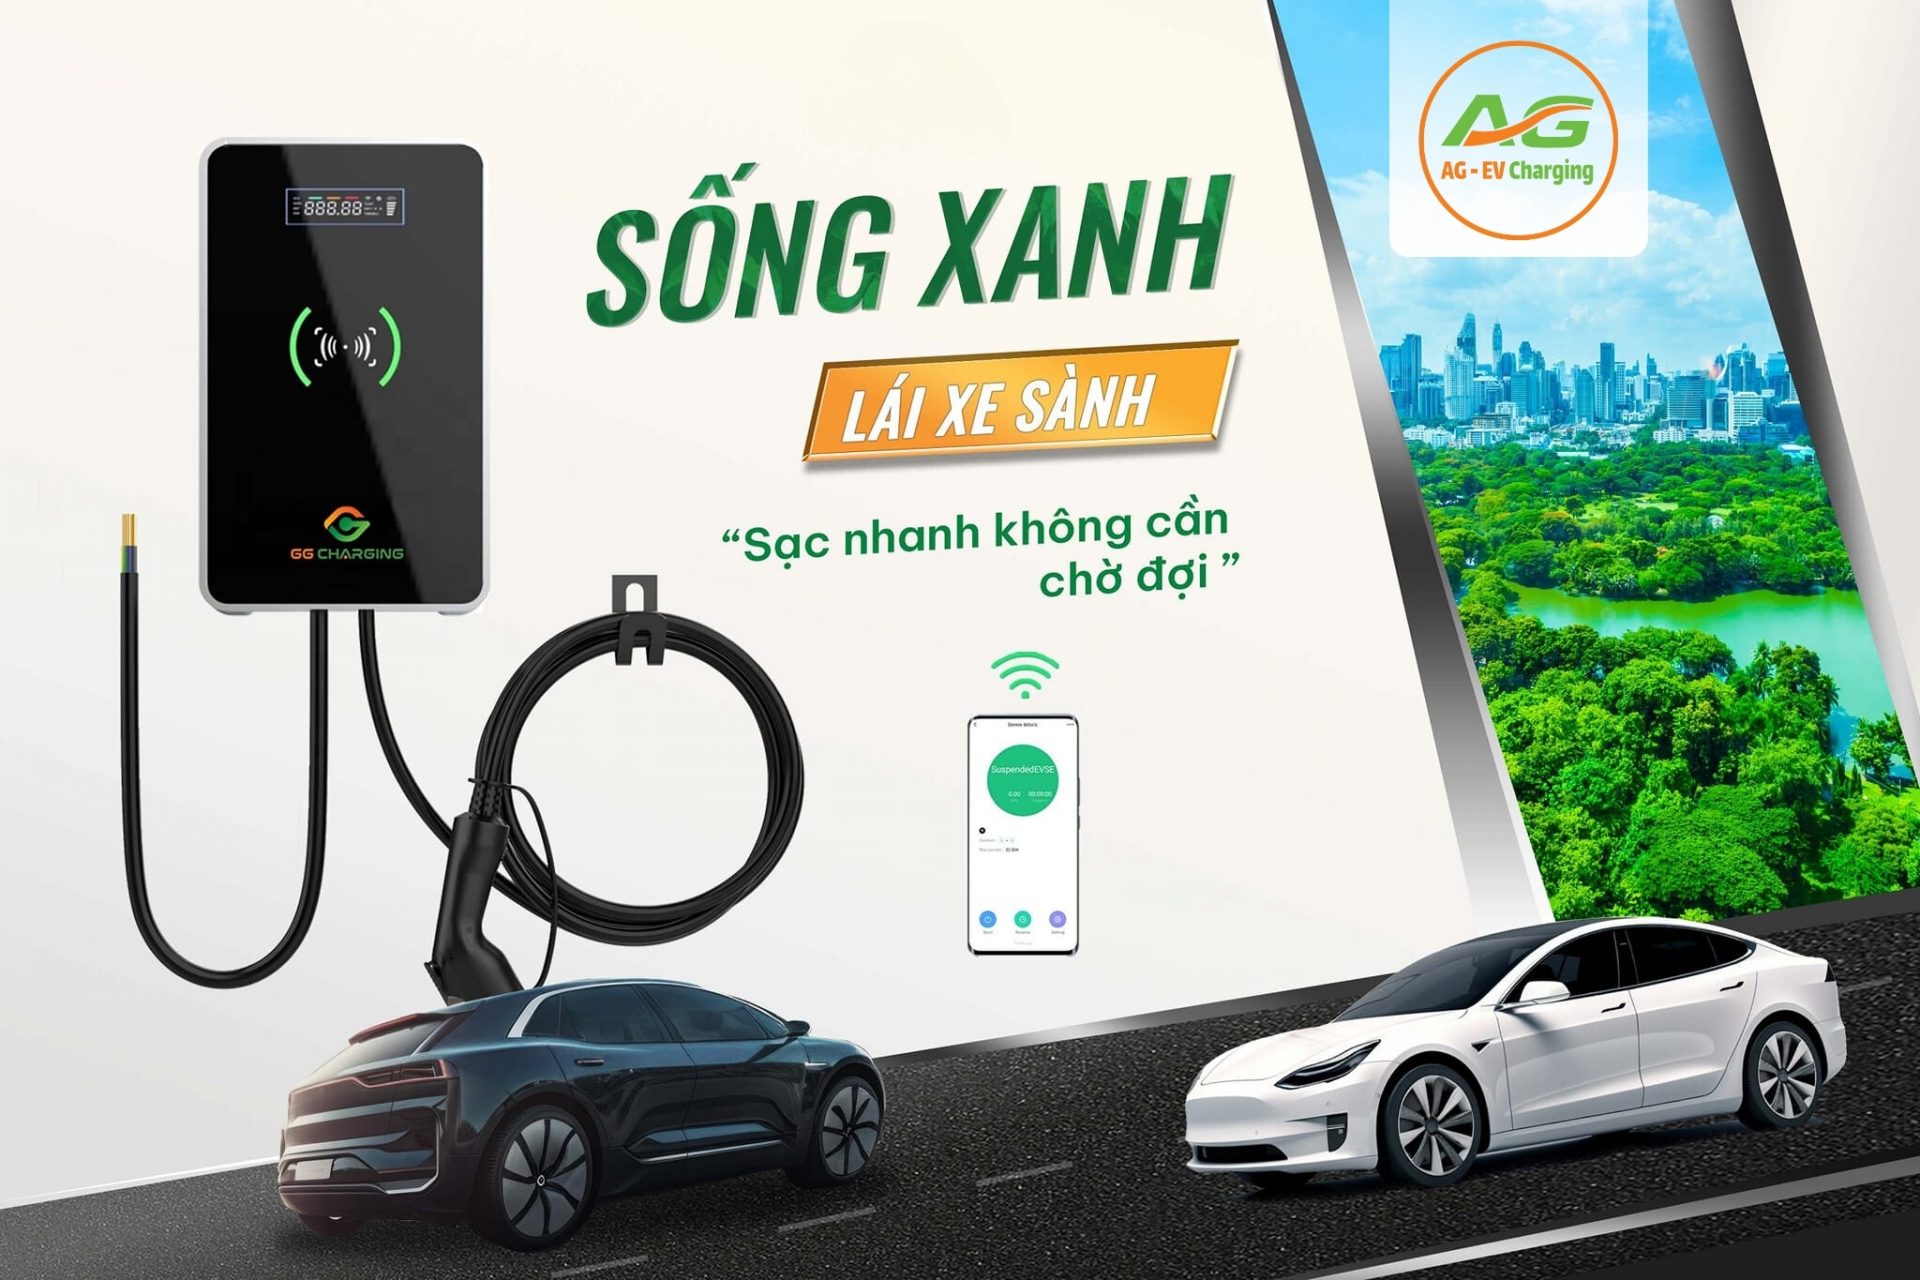 sac-o-to-dien-gia-dinh-gg-charging-22kw-acgg022-1-la-giai-phap-tien-ich-cho-nguoi-dung-o-to-dien